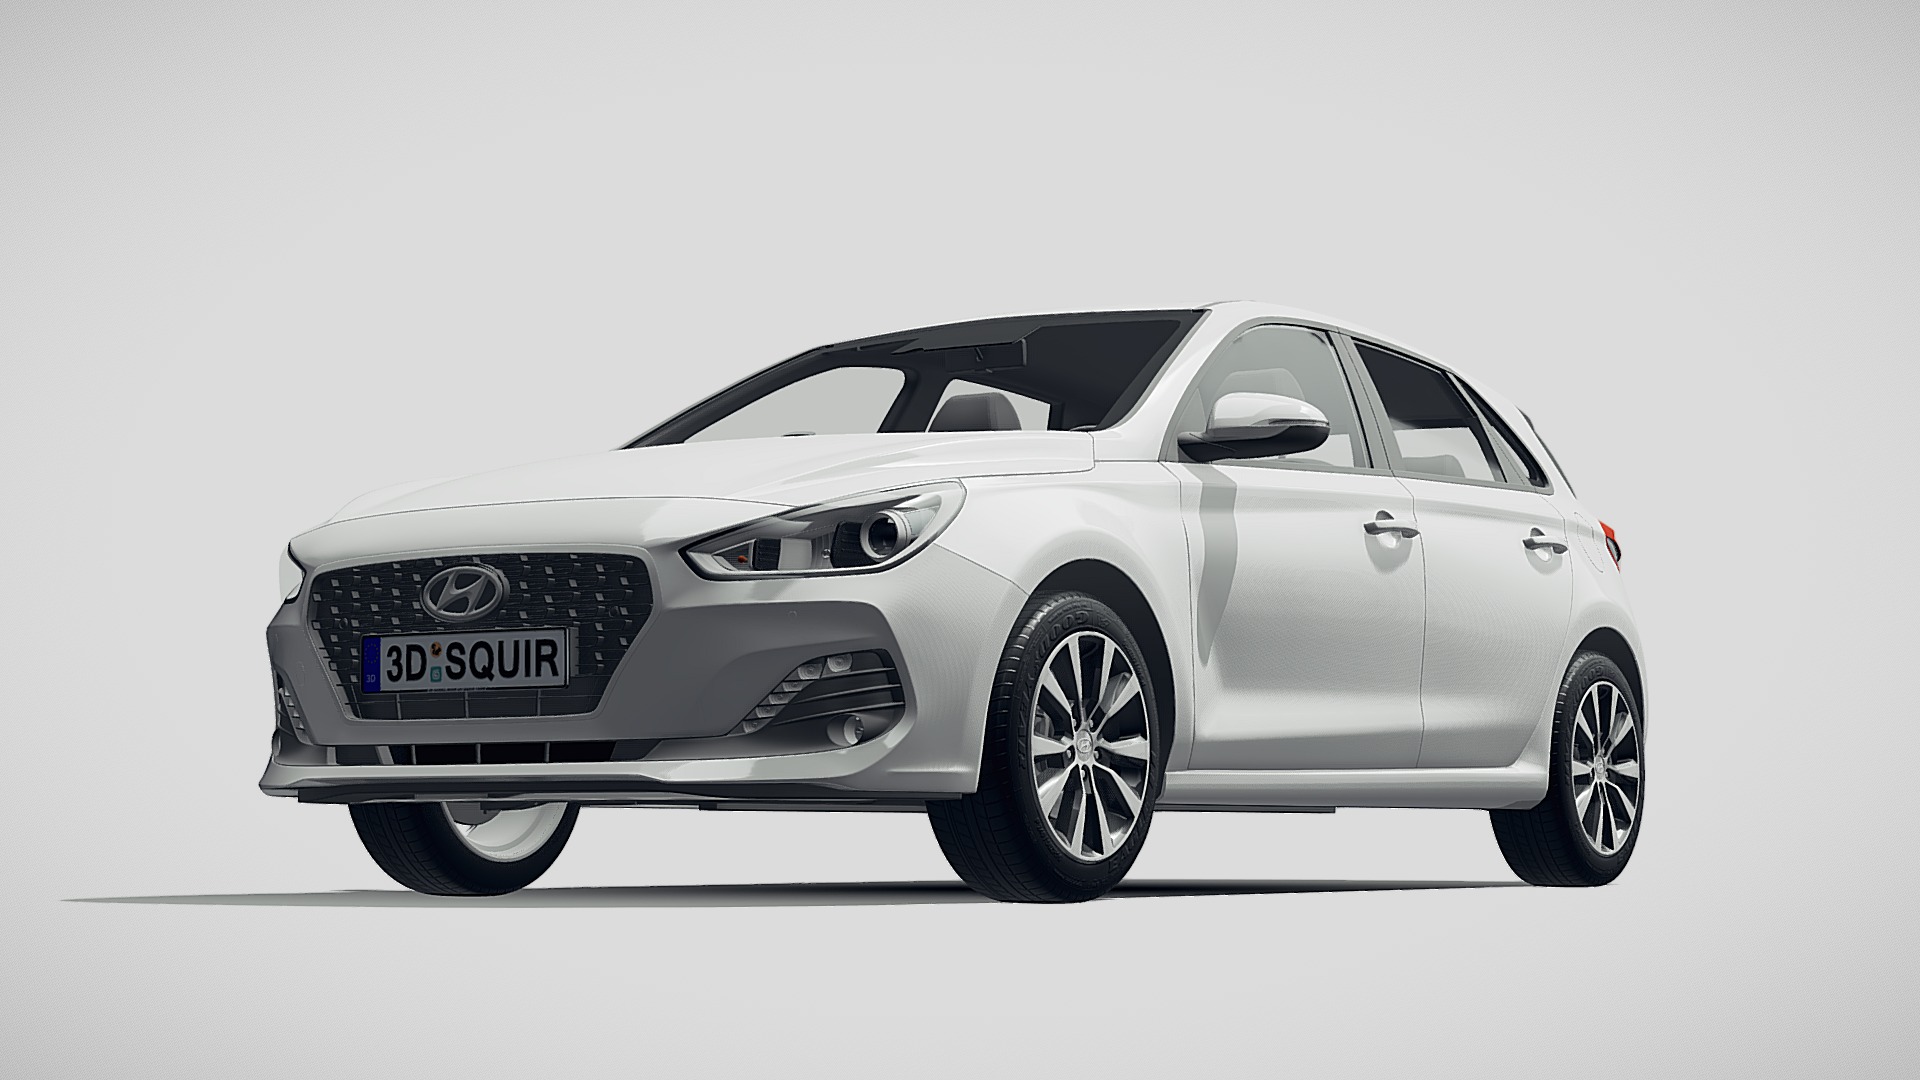 3D model Hyundai i30 2019 - This is a 3D model of the Hyundai i30 2019. The 3D model is about a silver car with a black background.